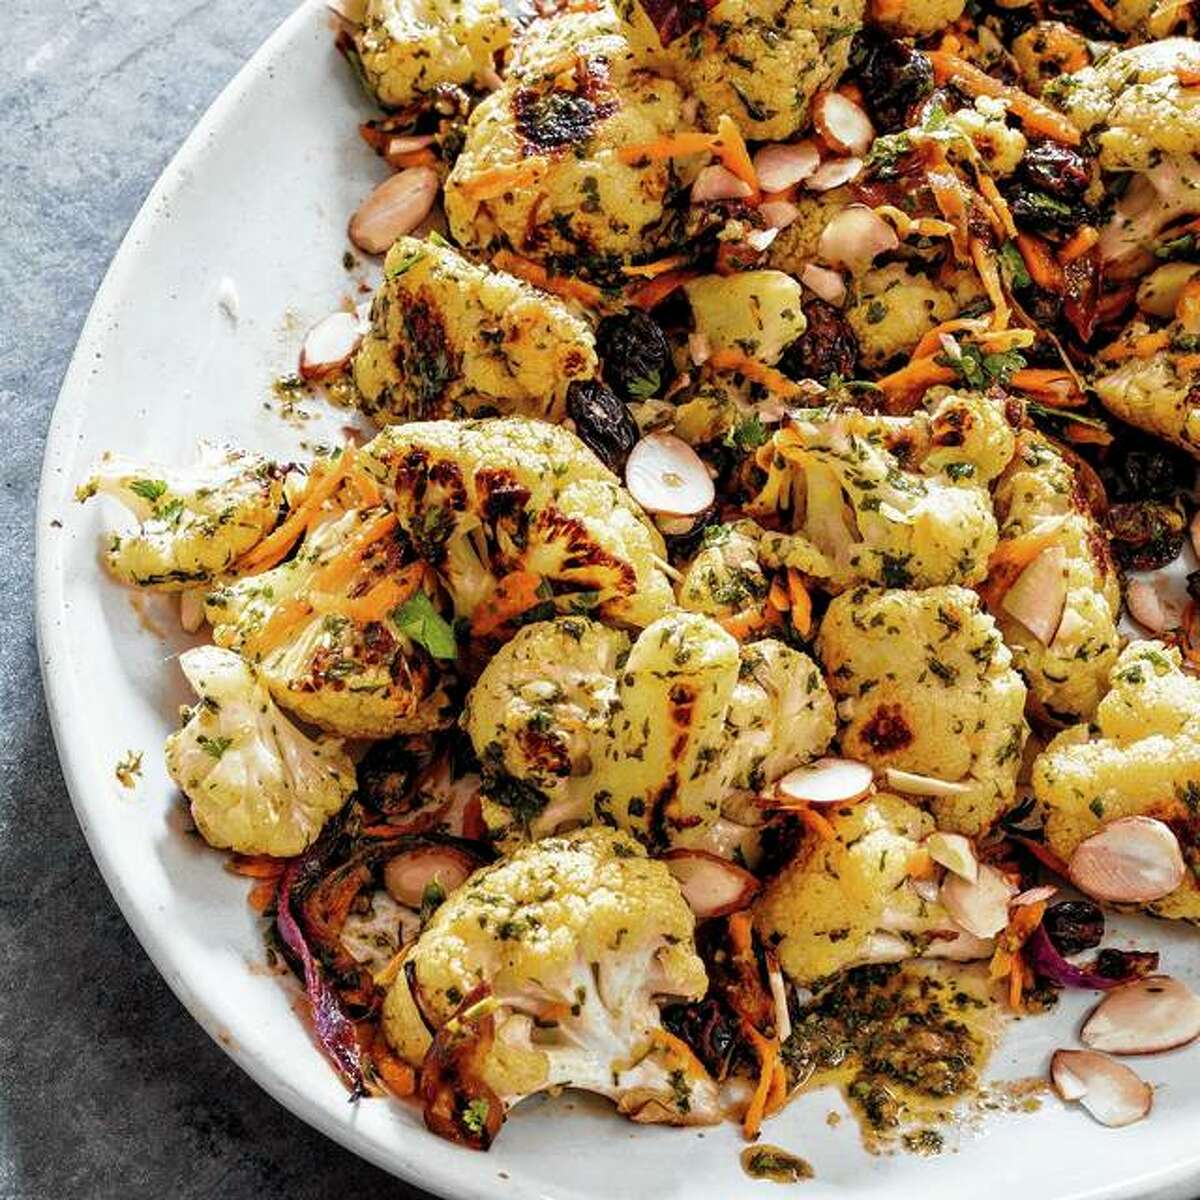 Cauliflower Salad with Chermoula and Carrots uses the flavors of Morocco to perk up cauliflower.